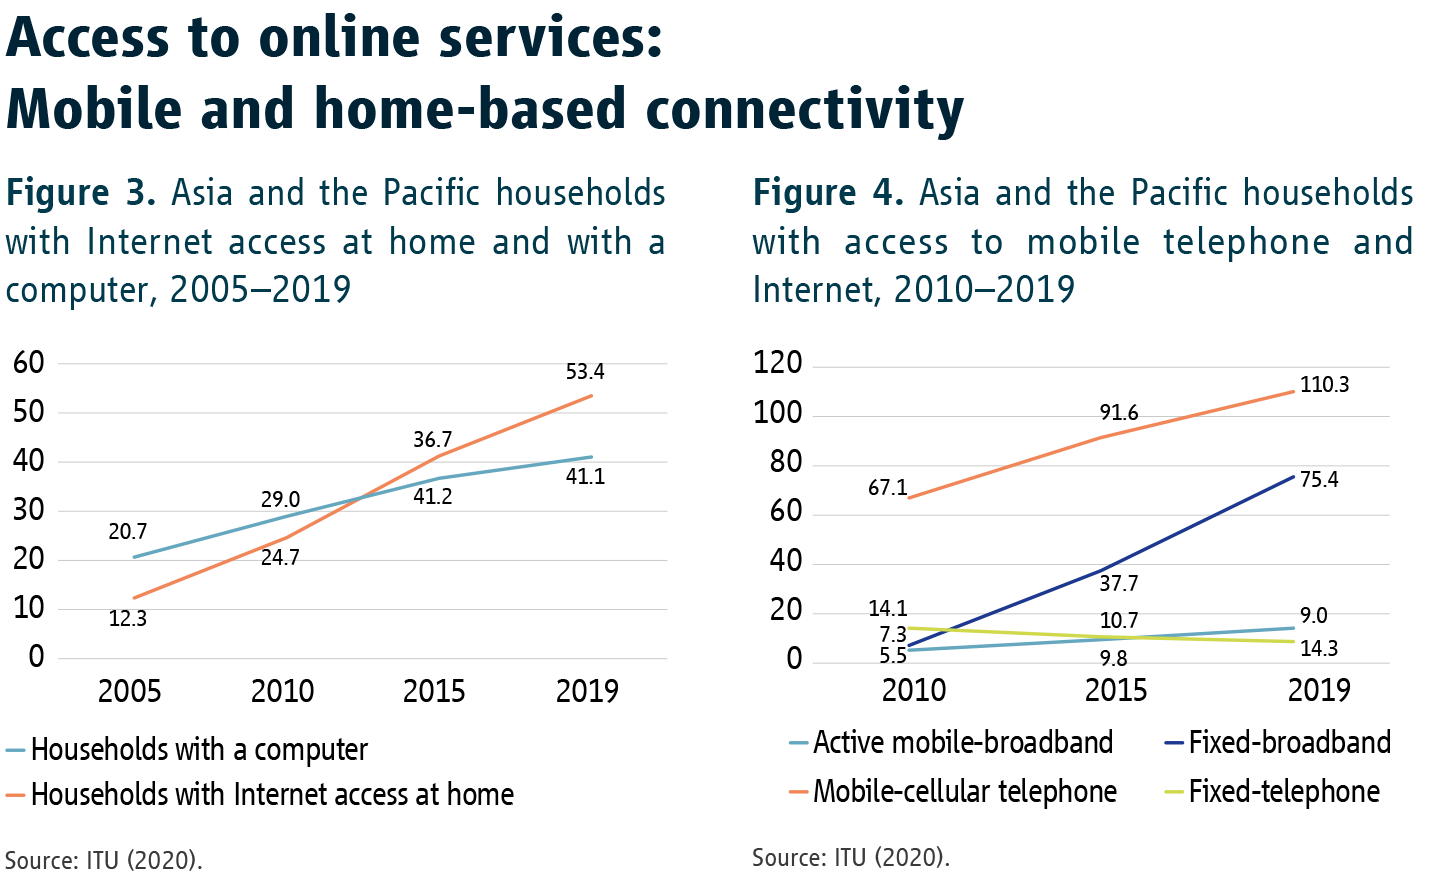 Access to online services: Mobile and home-based connectivity